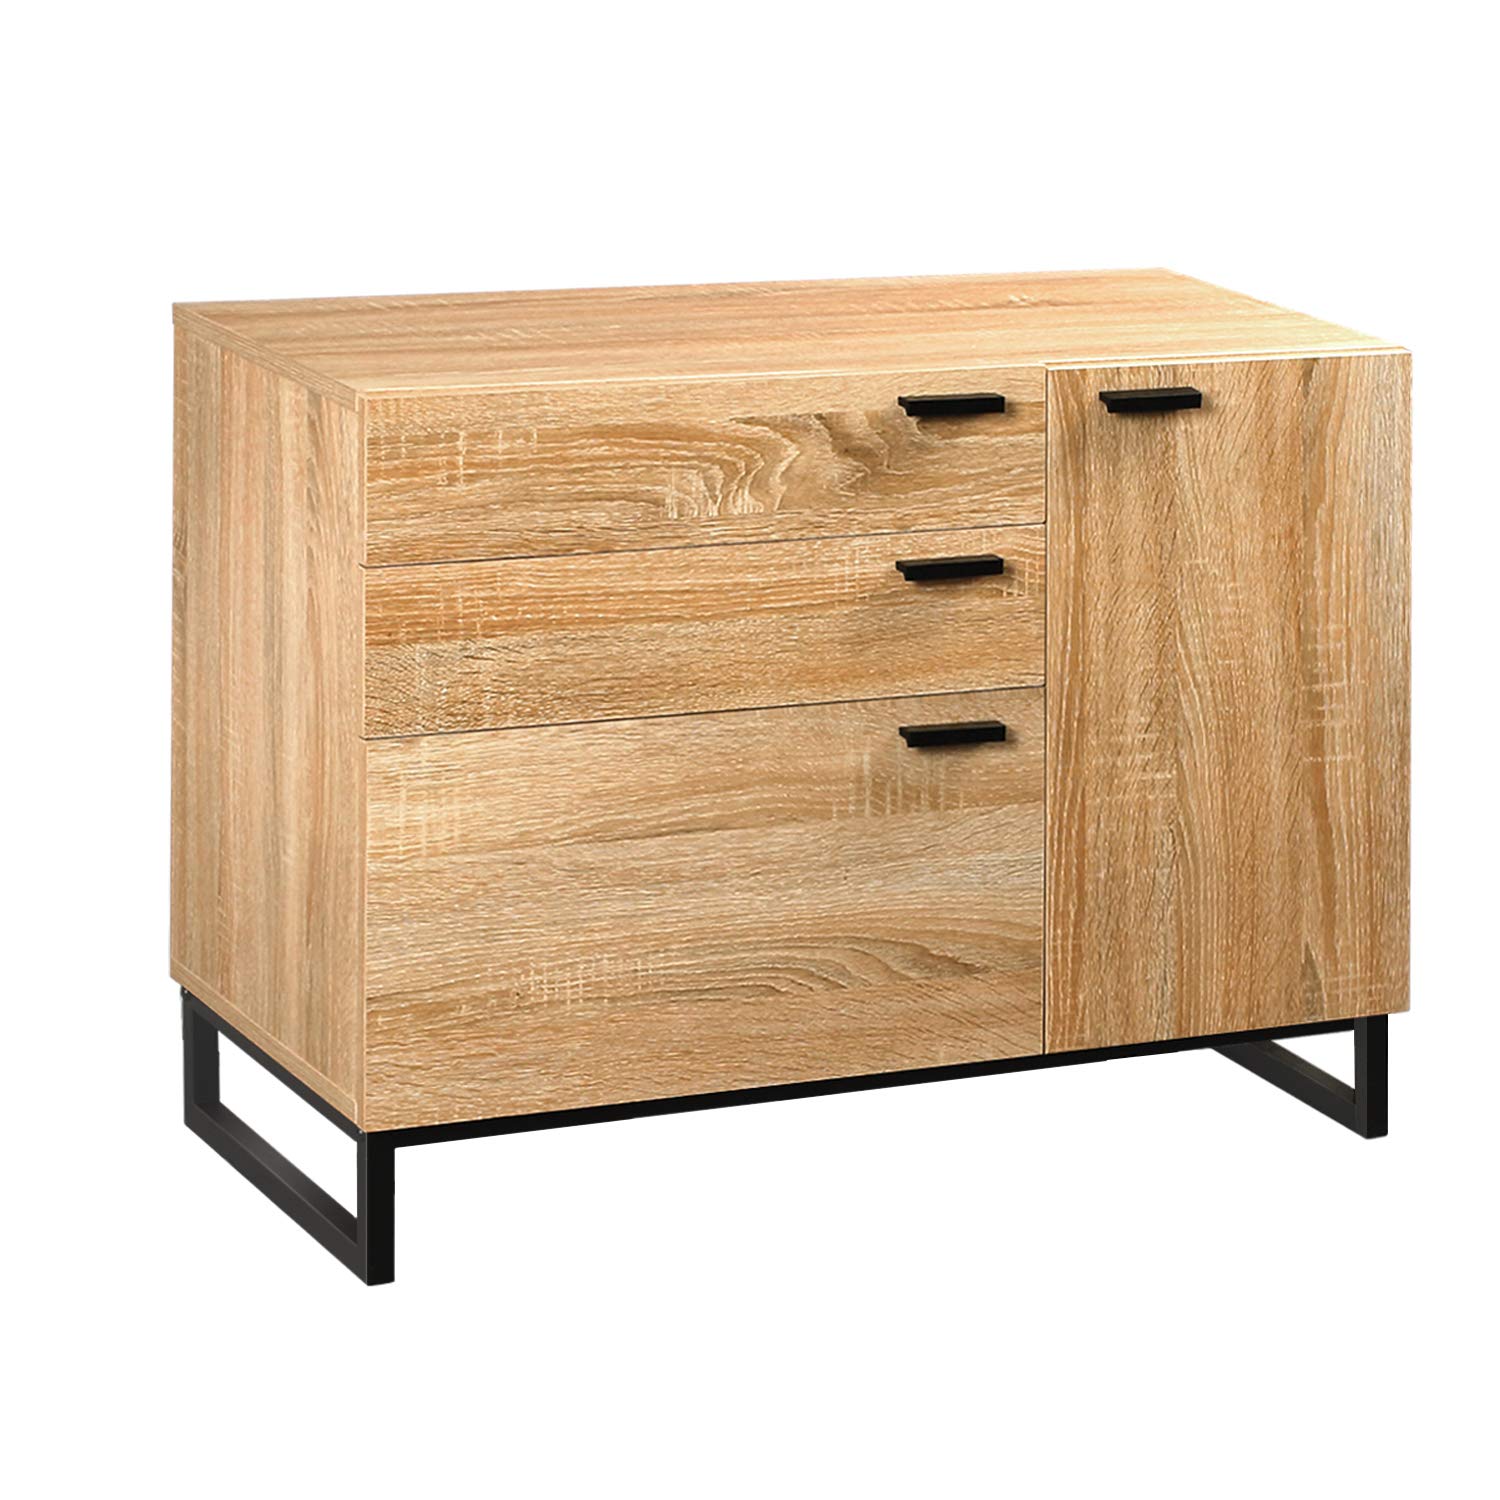 WLIVE Storage Cabinet with 3 Drawers and 1 Door Dresser in Oak,Work for Home Office with Steel Legs